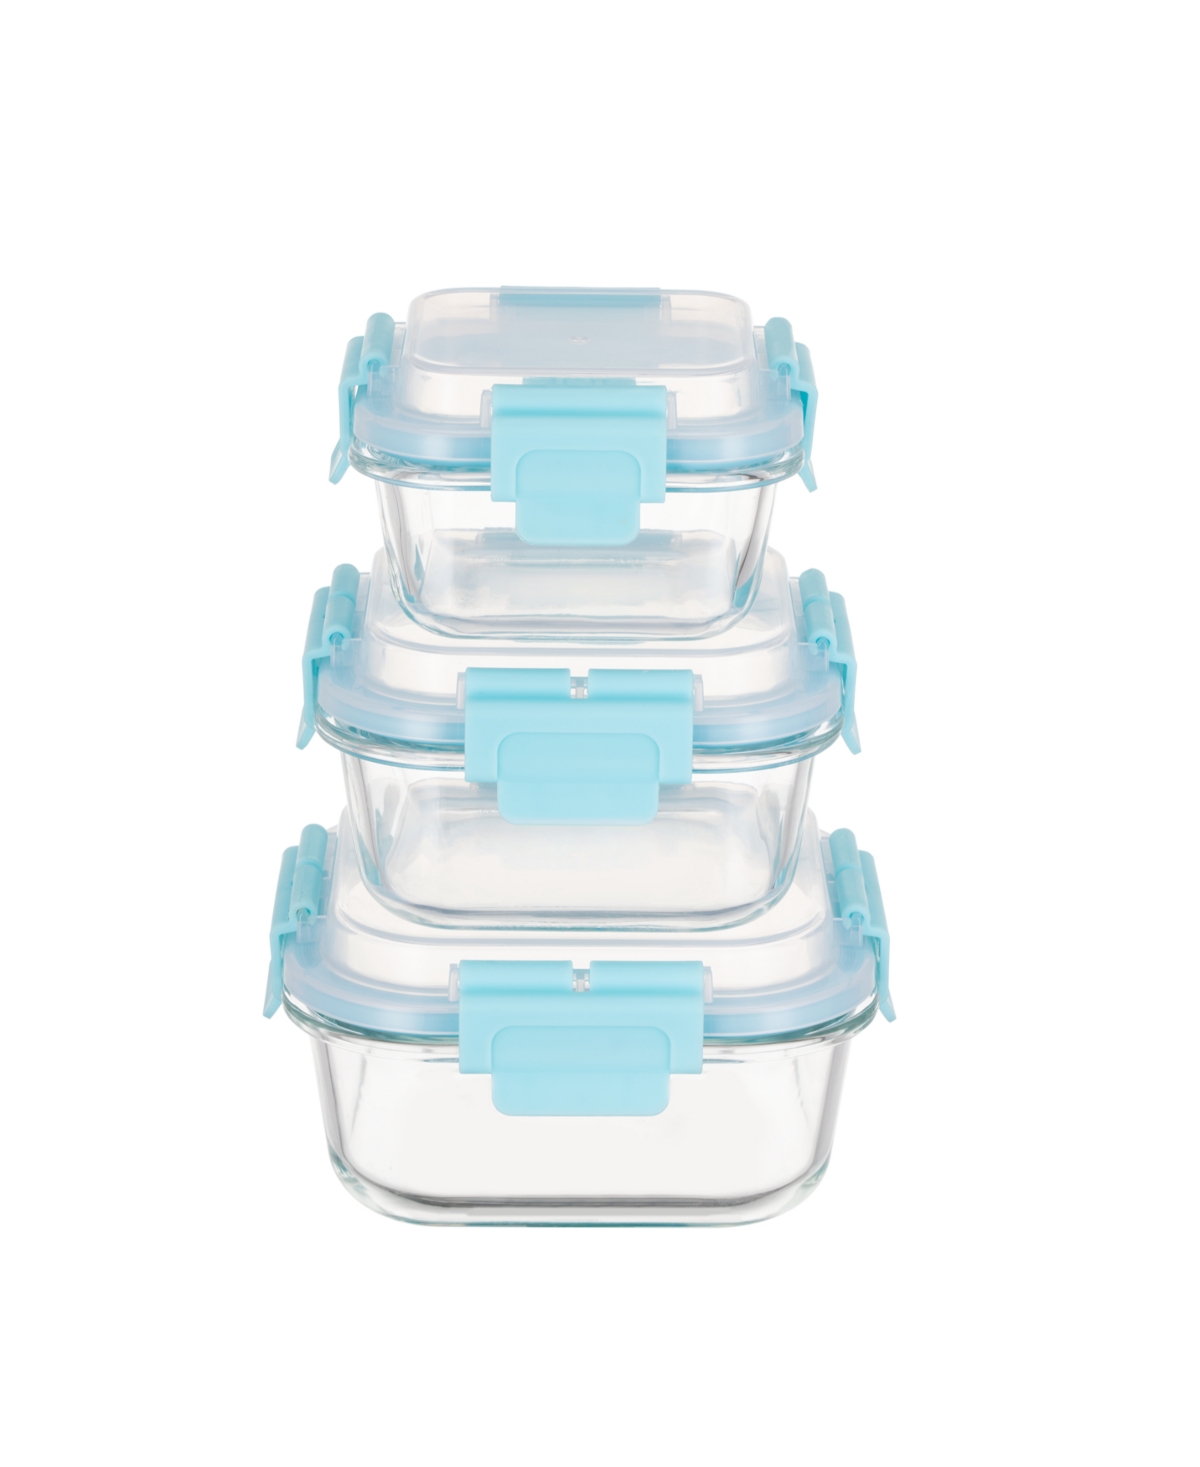 Genicook 3 Pc Square Container Hi-top Lids With Pro Grade Removable Lockdown Levers Set In Aqua Blue